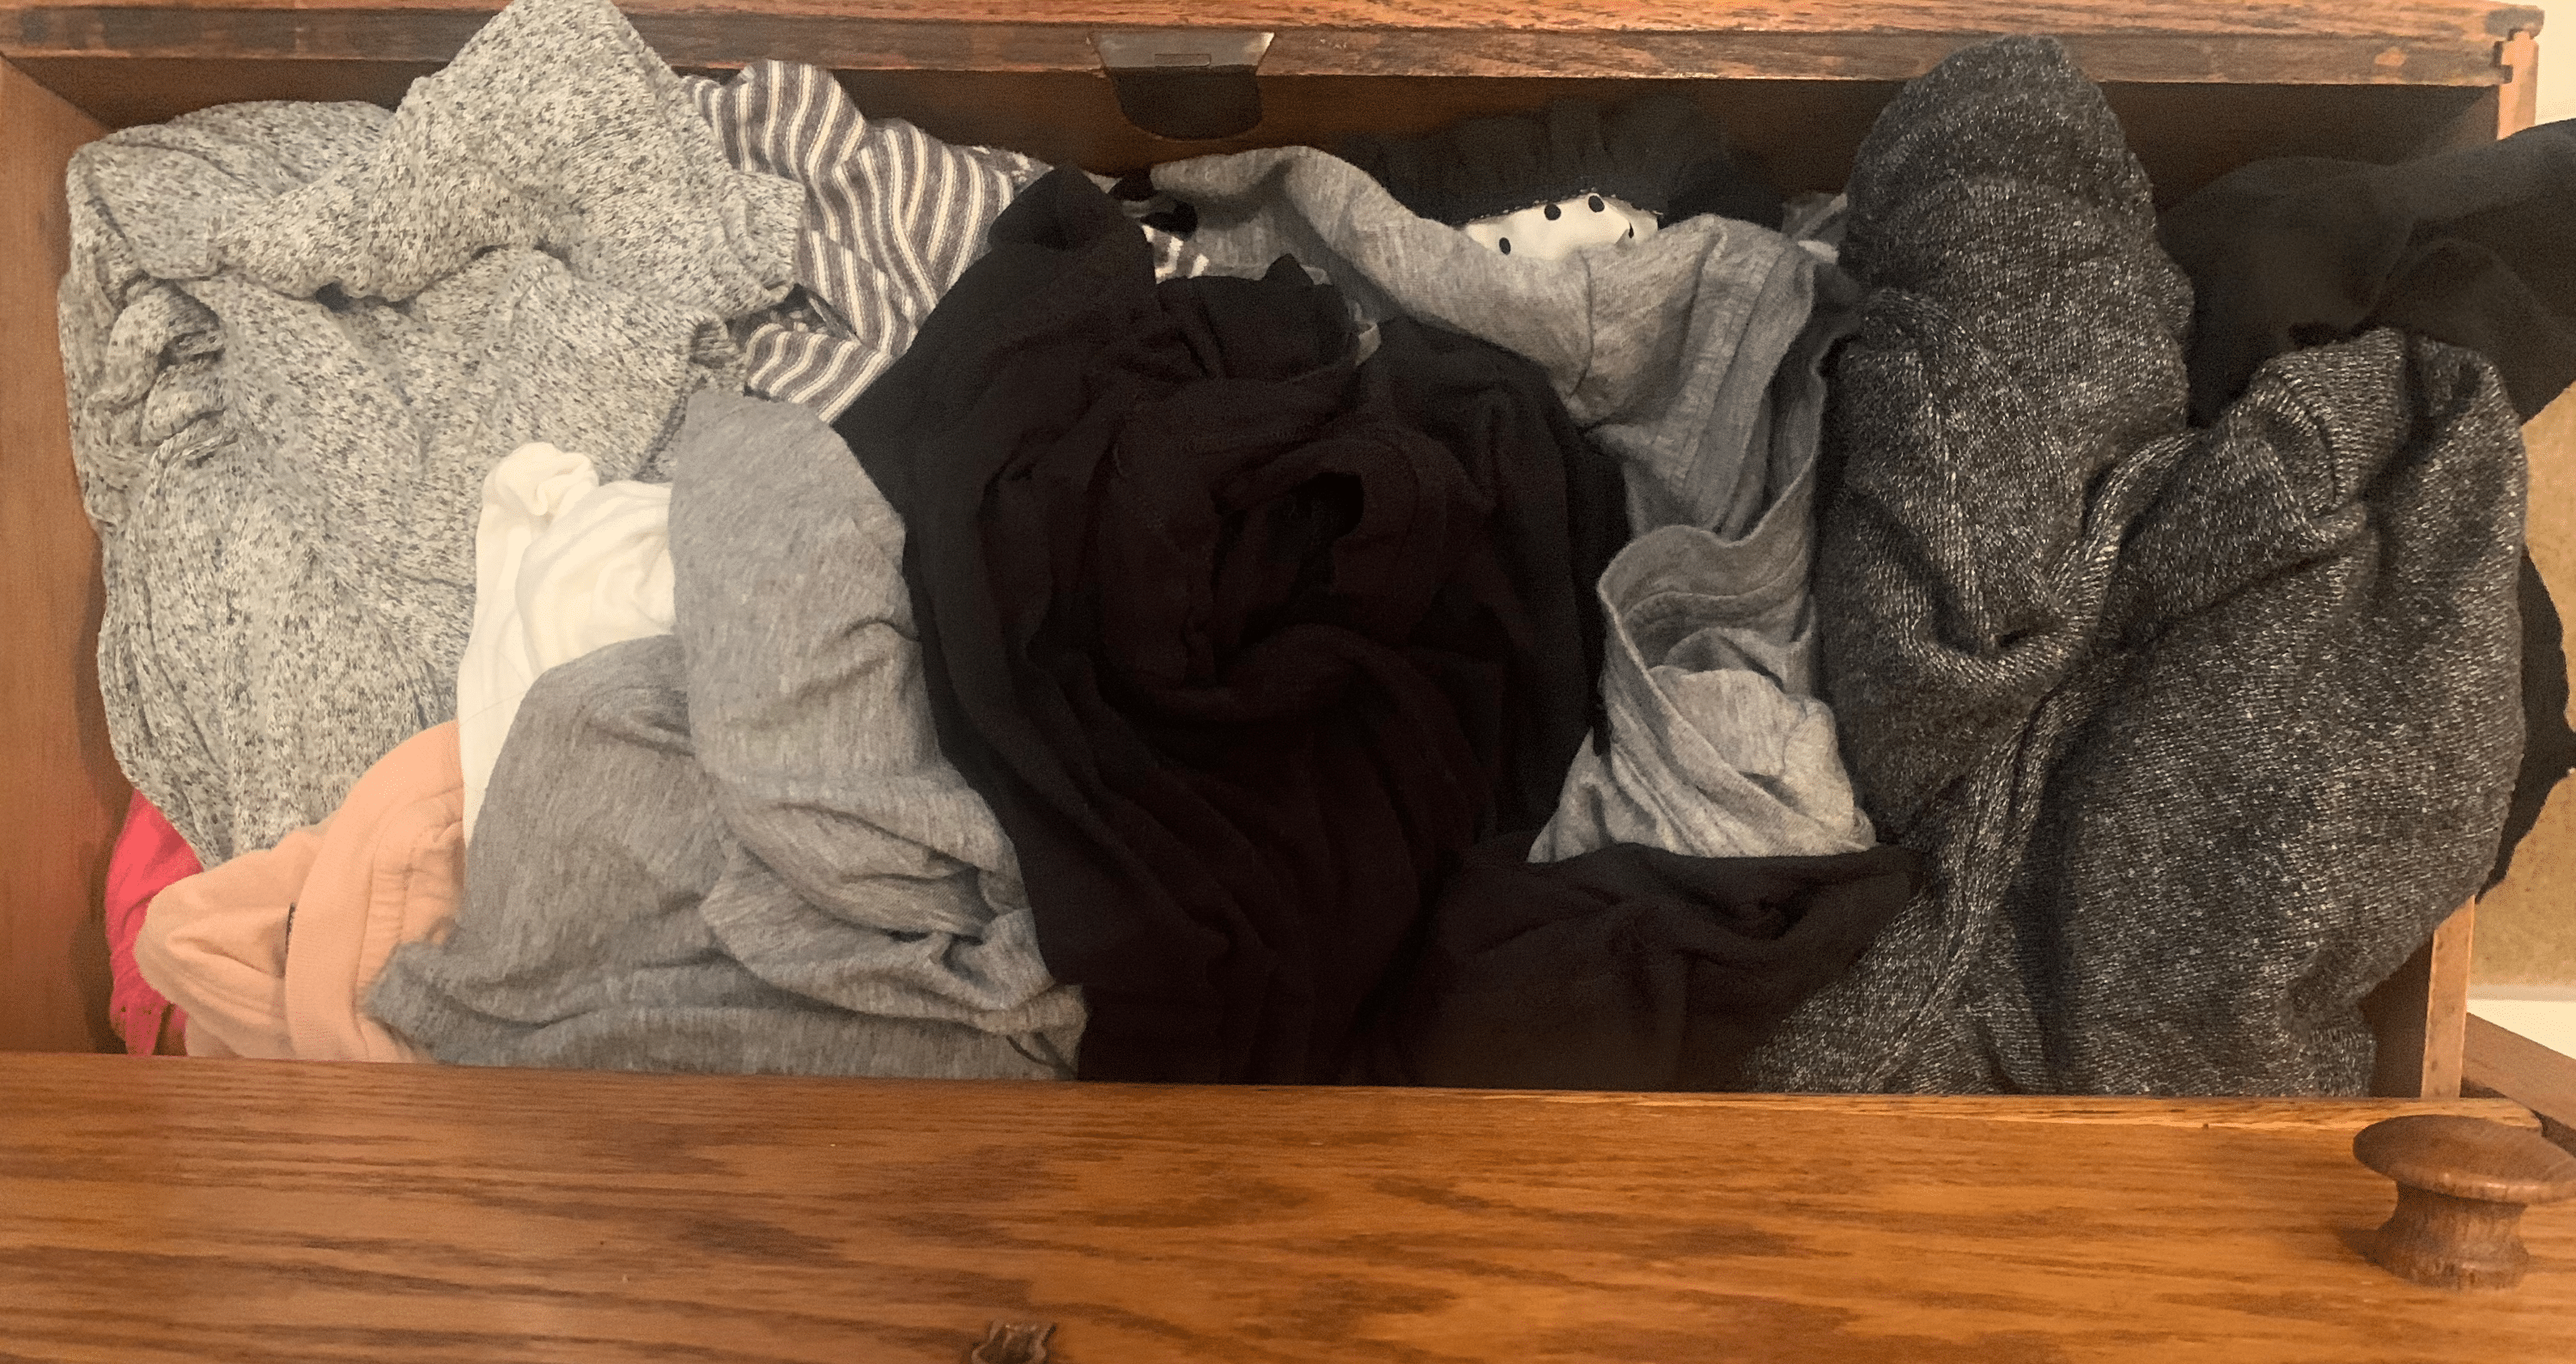 Messy drawer of clothes